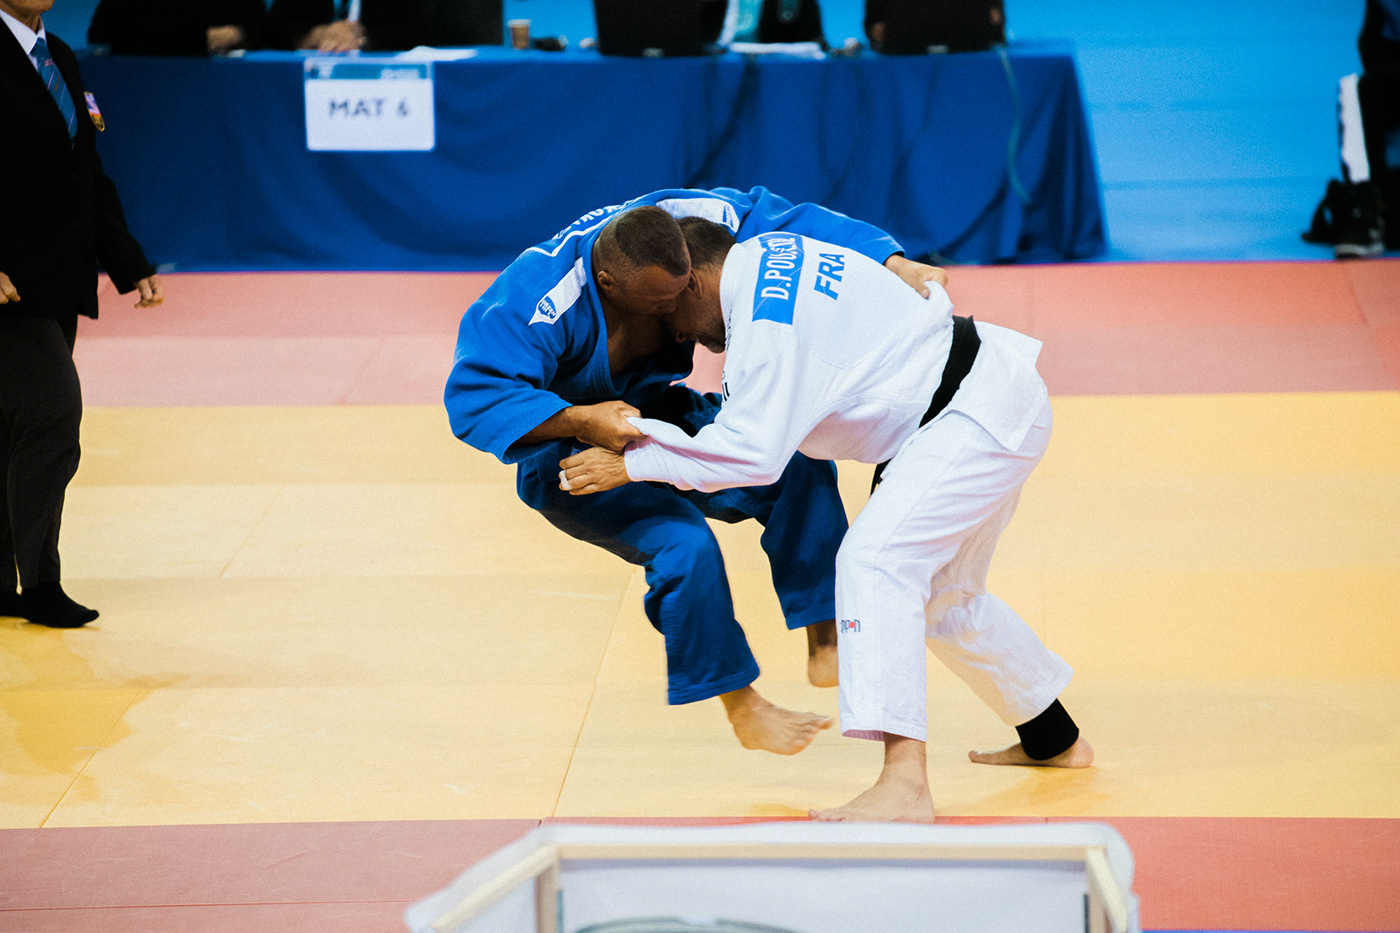 action Judo Photography  sport